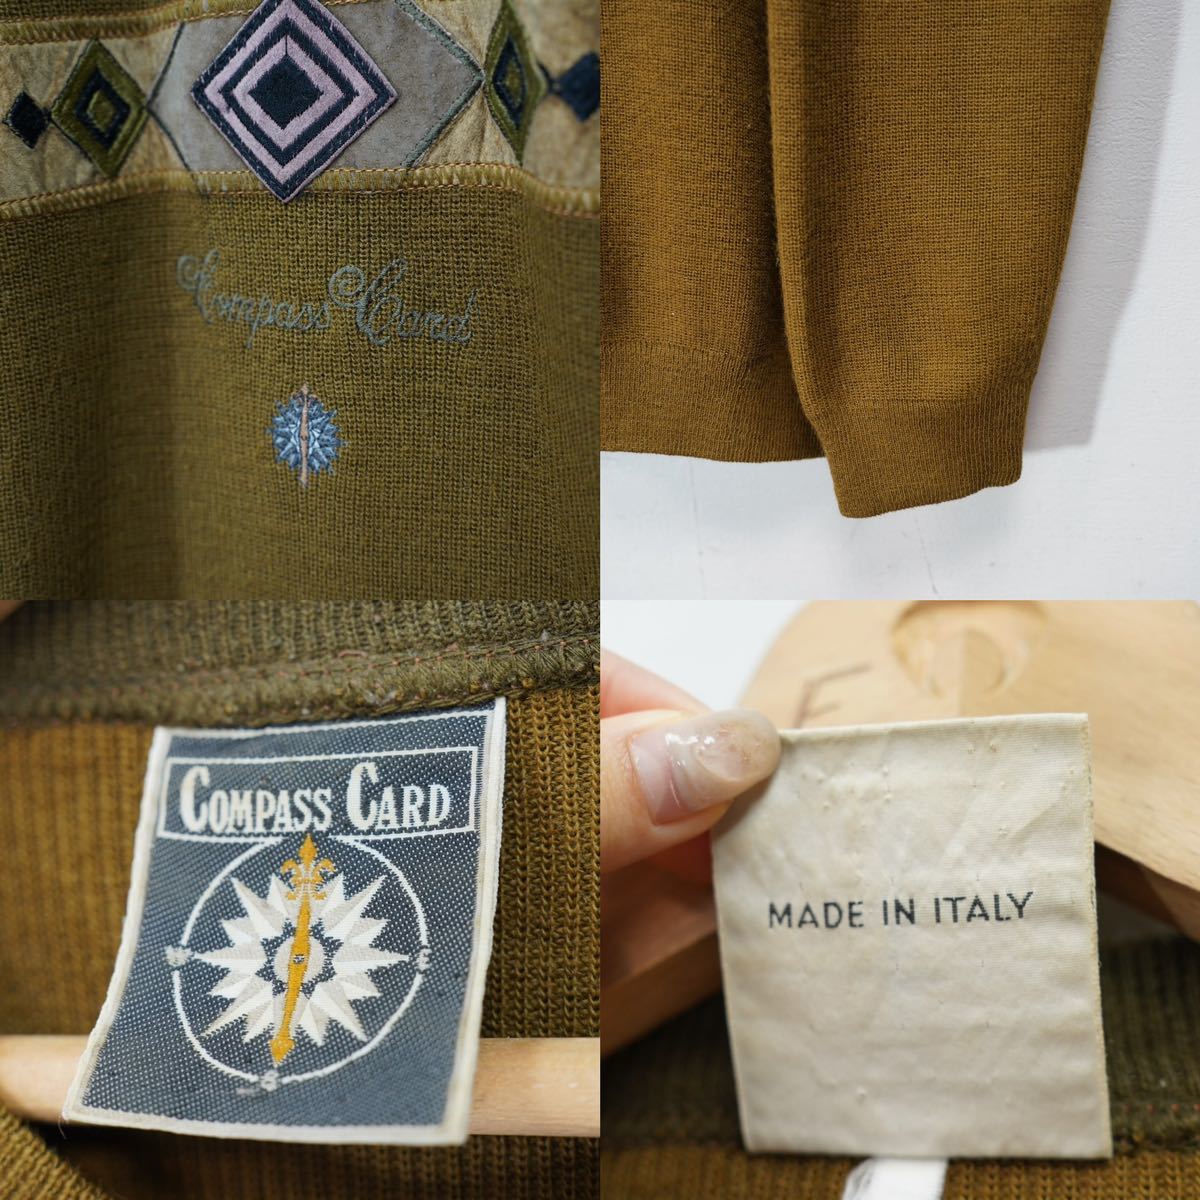 EU VINATGE COMPASS CARD EMBROIDERY DESIGN KNIT MADE IN ITALY/ヨーロッパ古着刺繍デザインニット_画像10